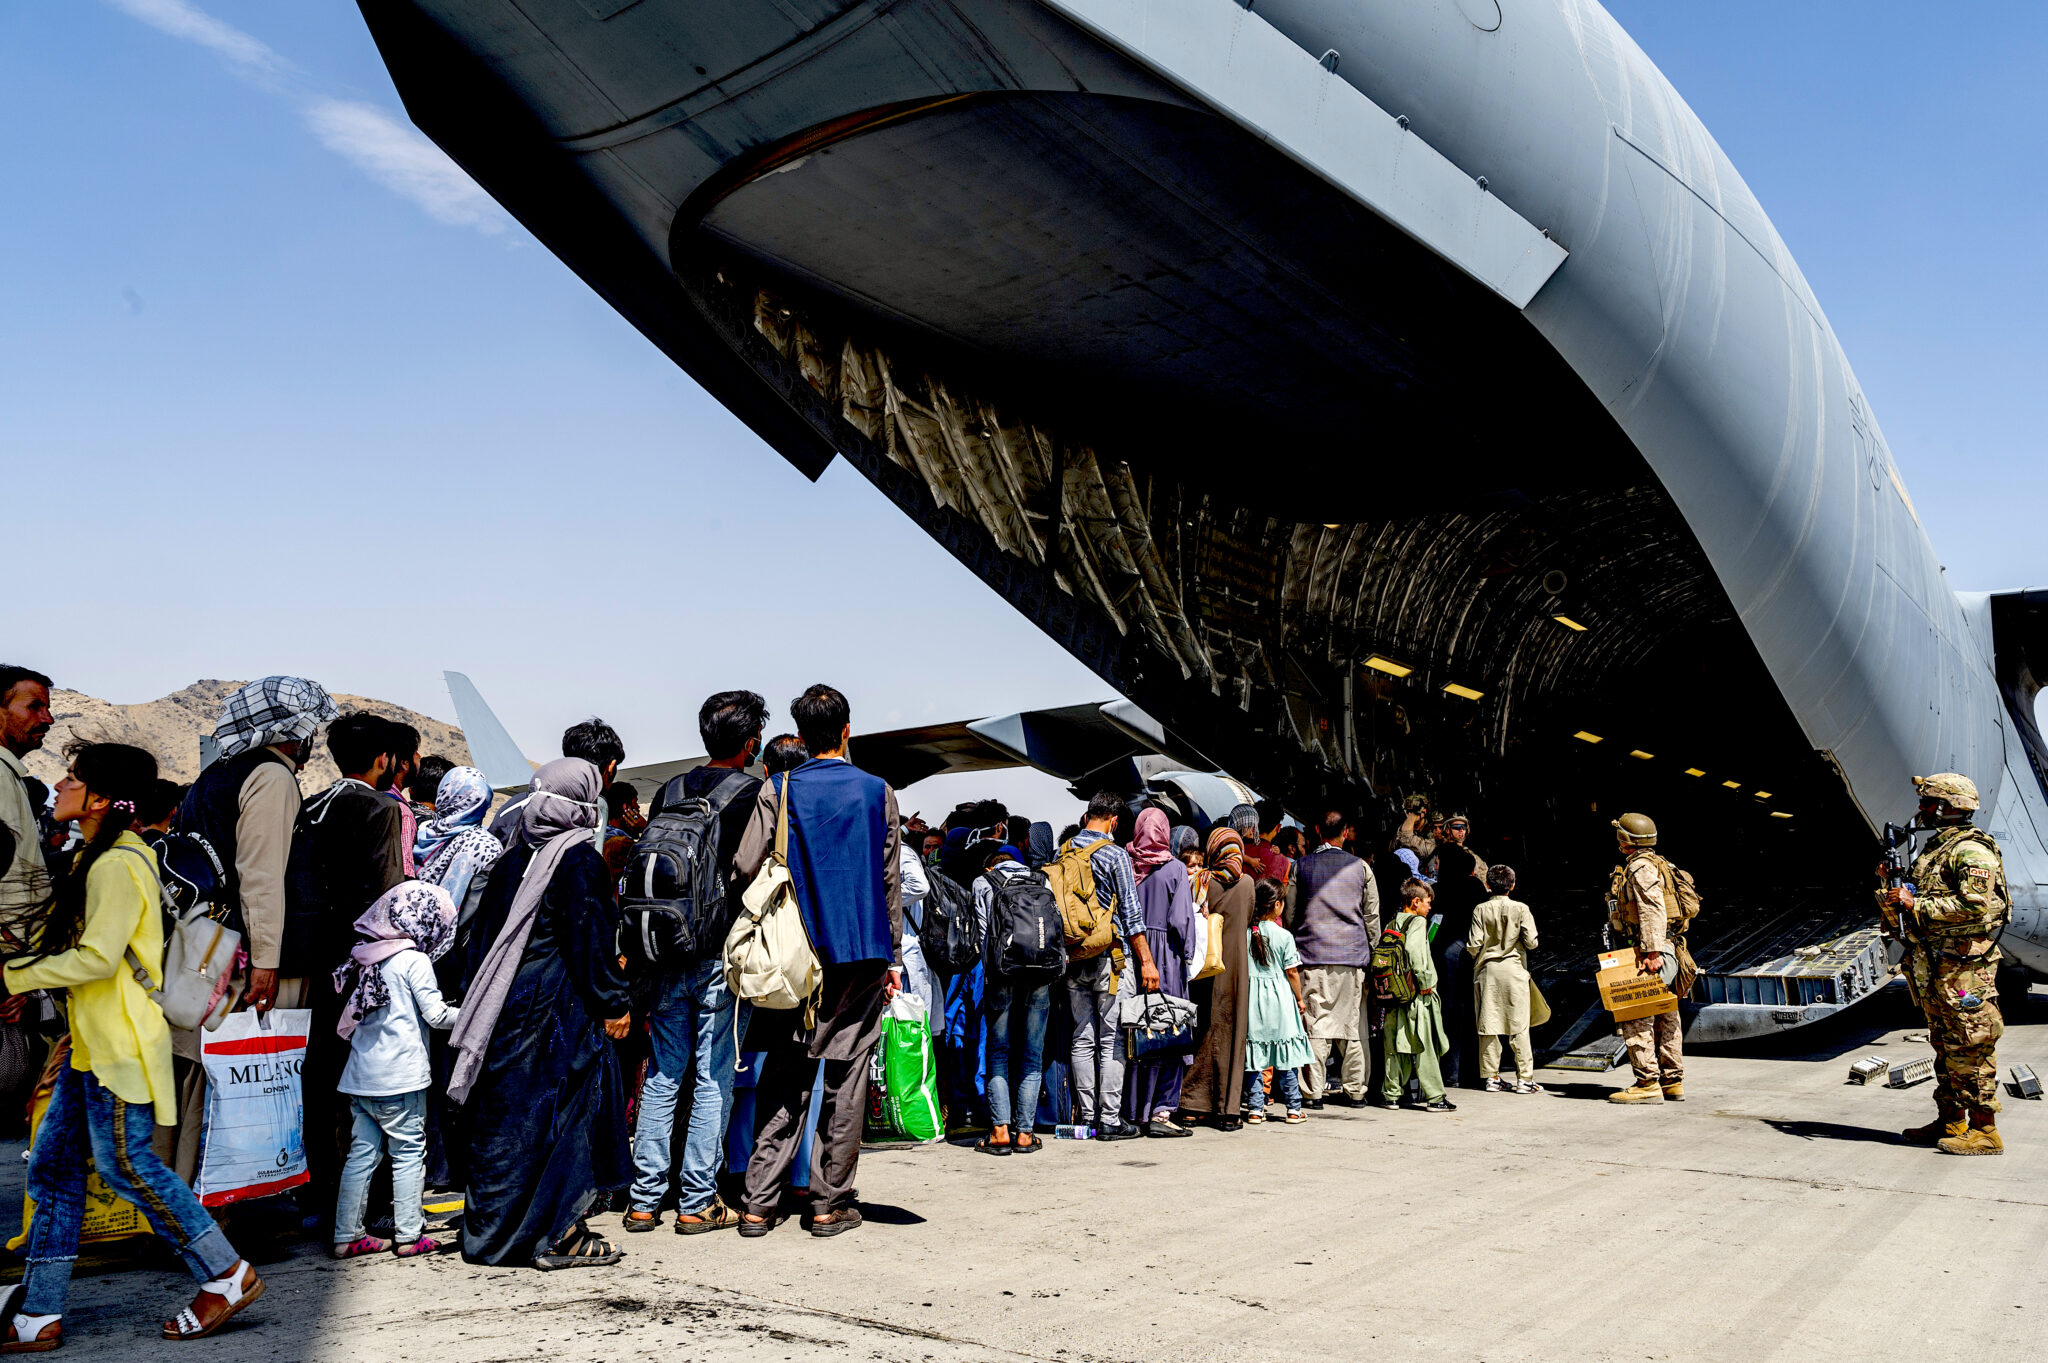 U.S. soldiers with Afghans boarding a C-17 Globemaster III at Hamid Karzai International Airport on Aug. 21 after the Taliban captured Kabul. (U.S. Air Force, Brennen Lege)